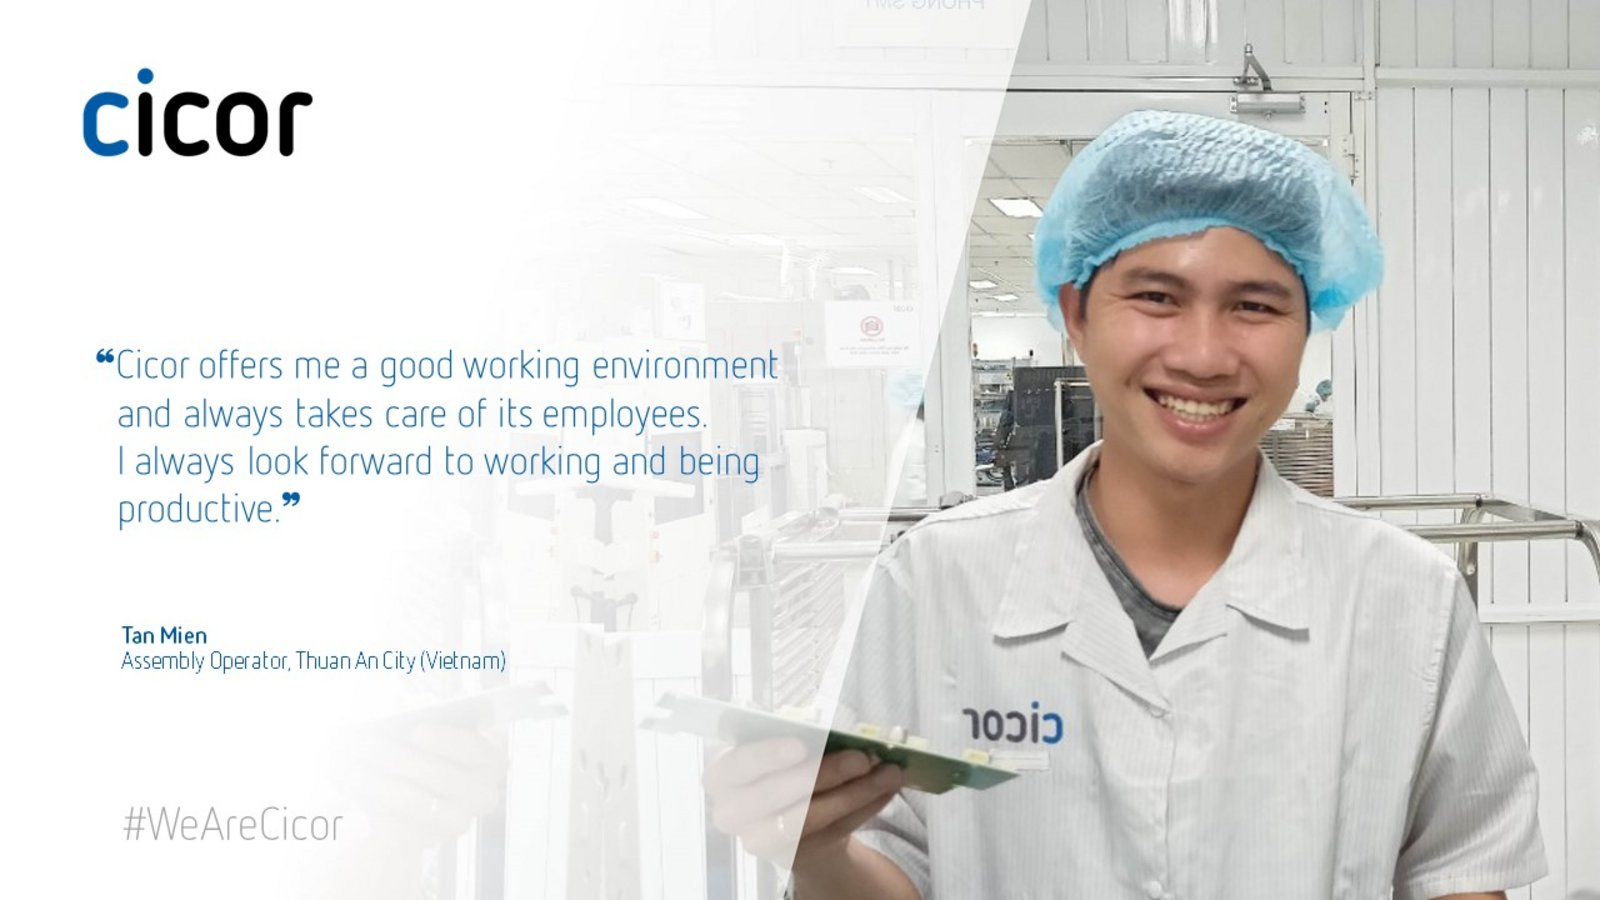 Testimonial of Tan who works at the Cicor site in Thuan An City